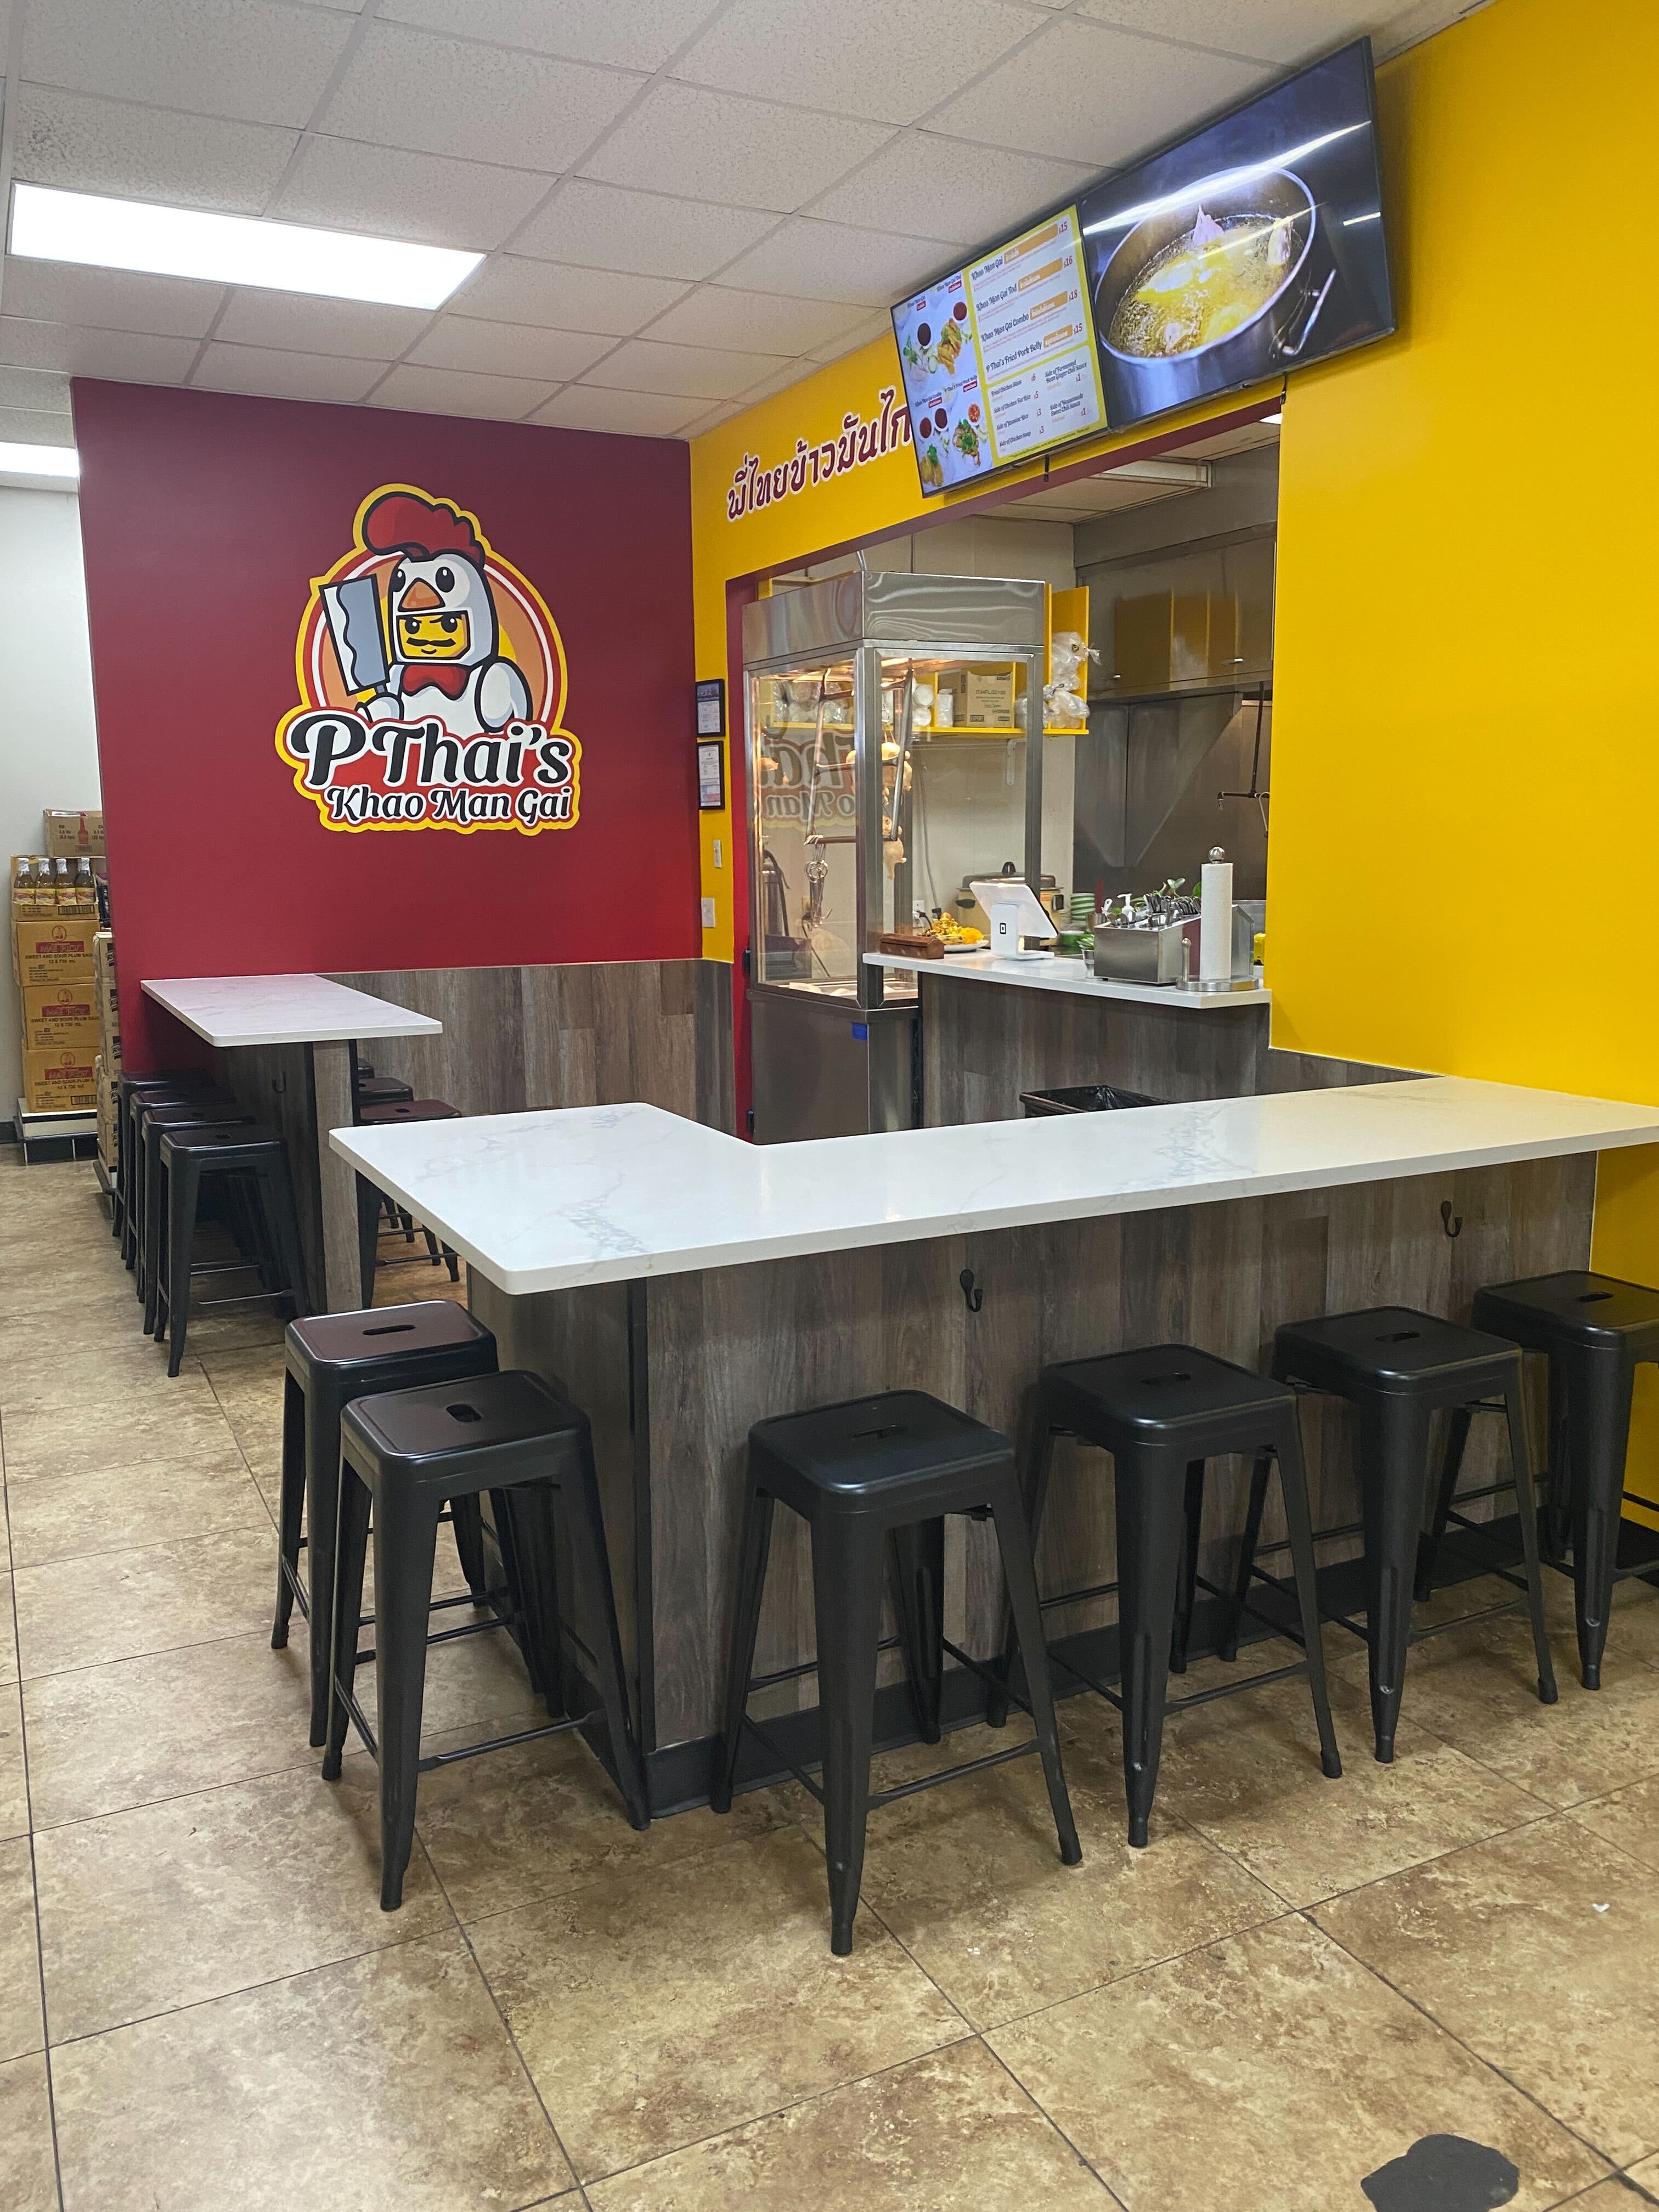 A restaurant food stall counter with yellow and red walls, a chicken logo on the red wall, and bar stools.